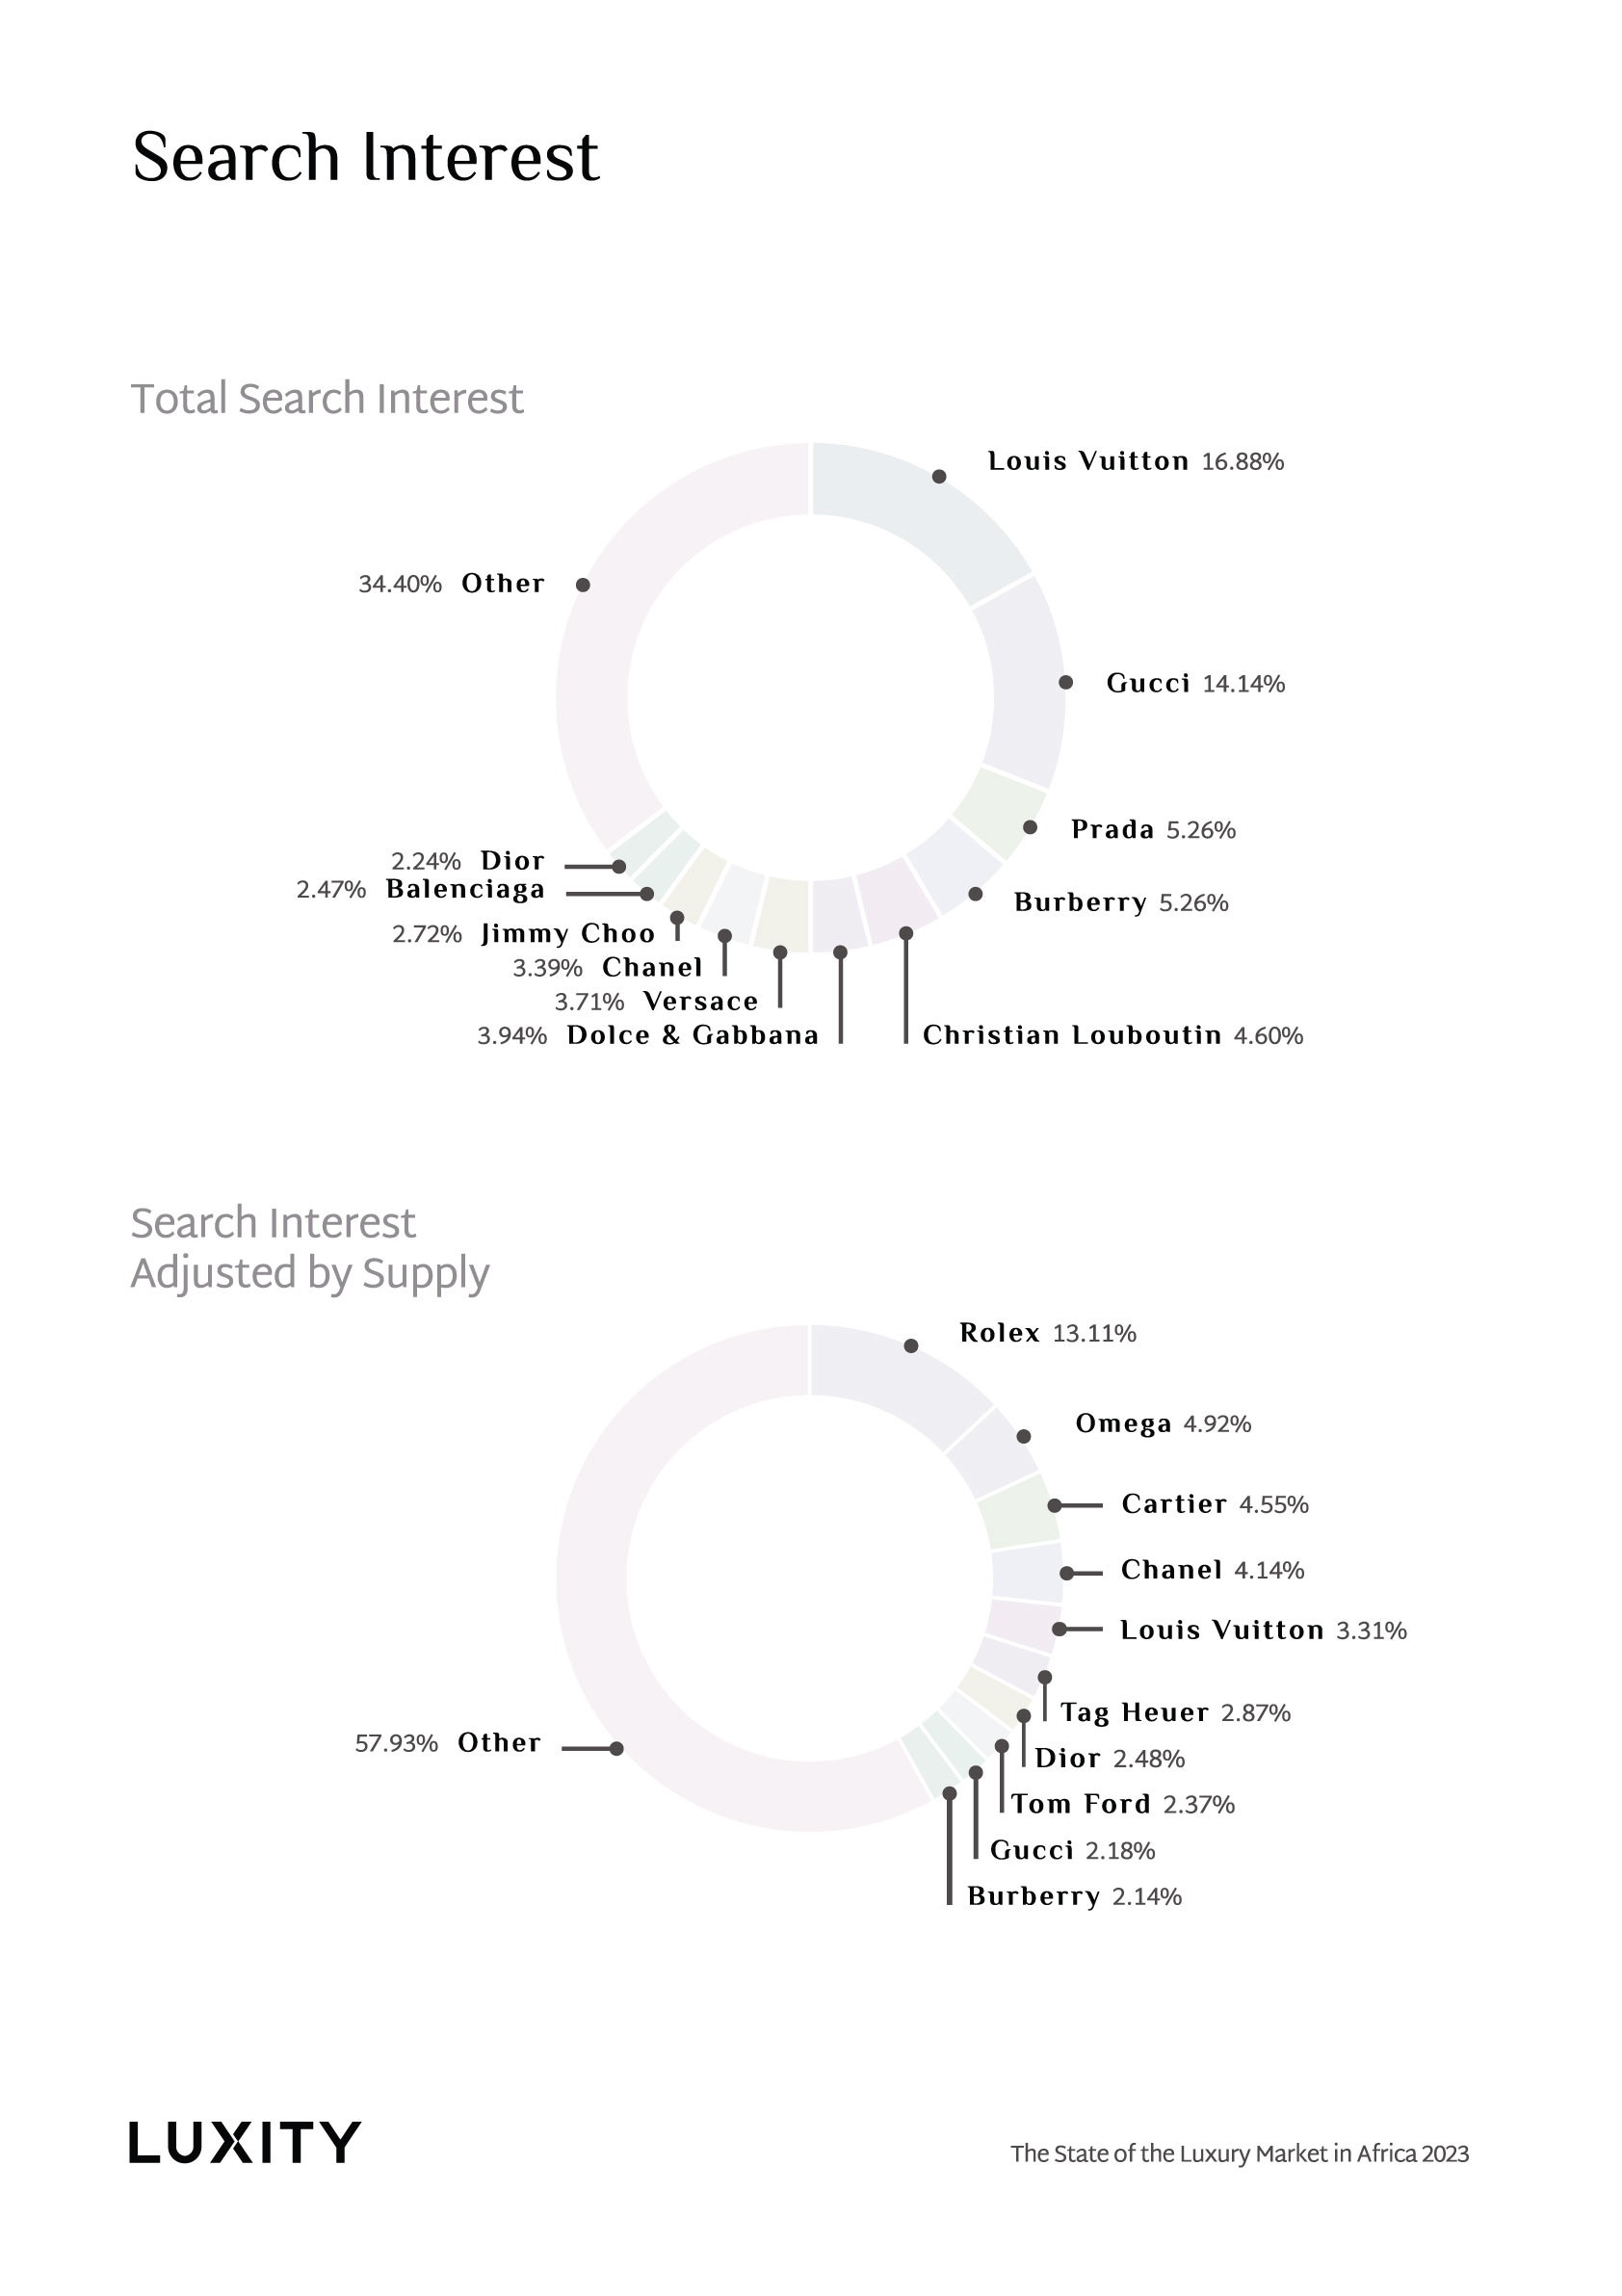 Search Interest of Luxury Brands